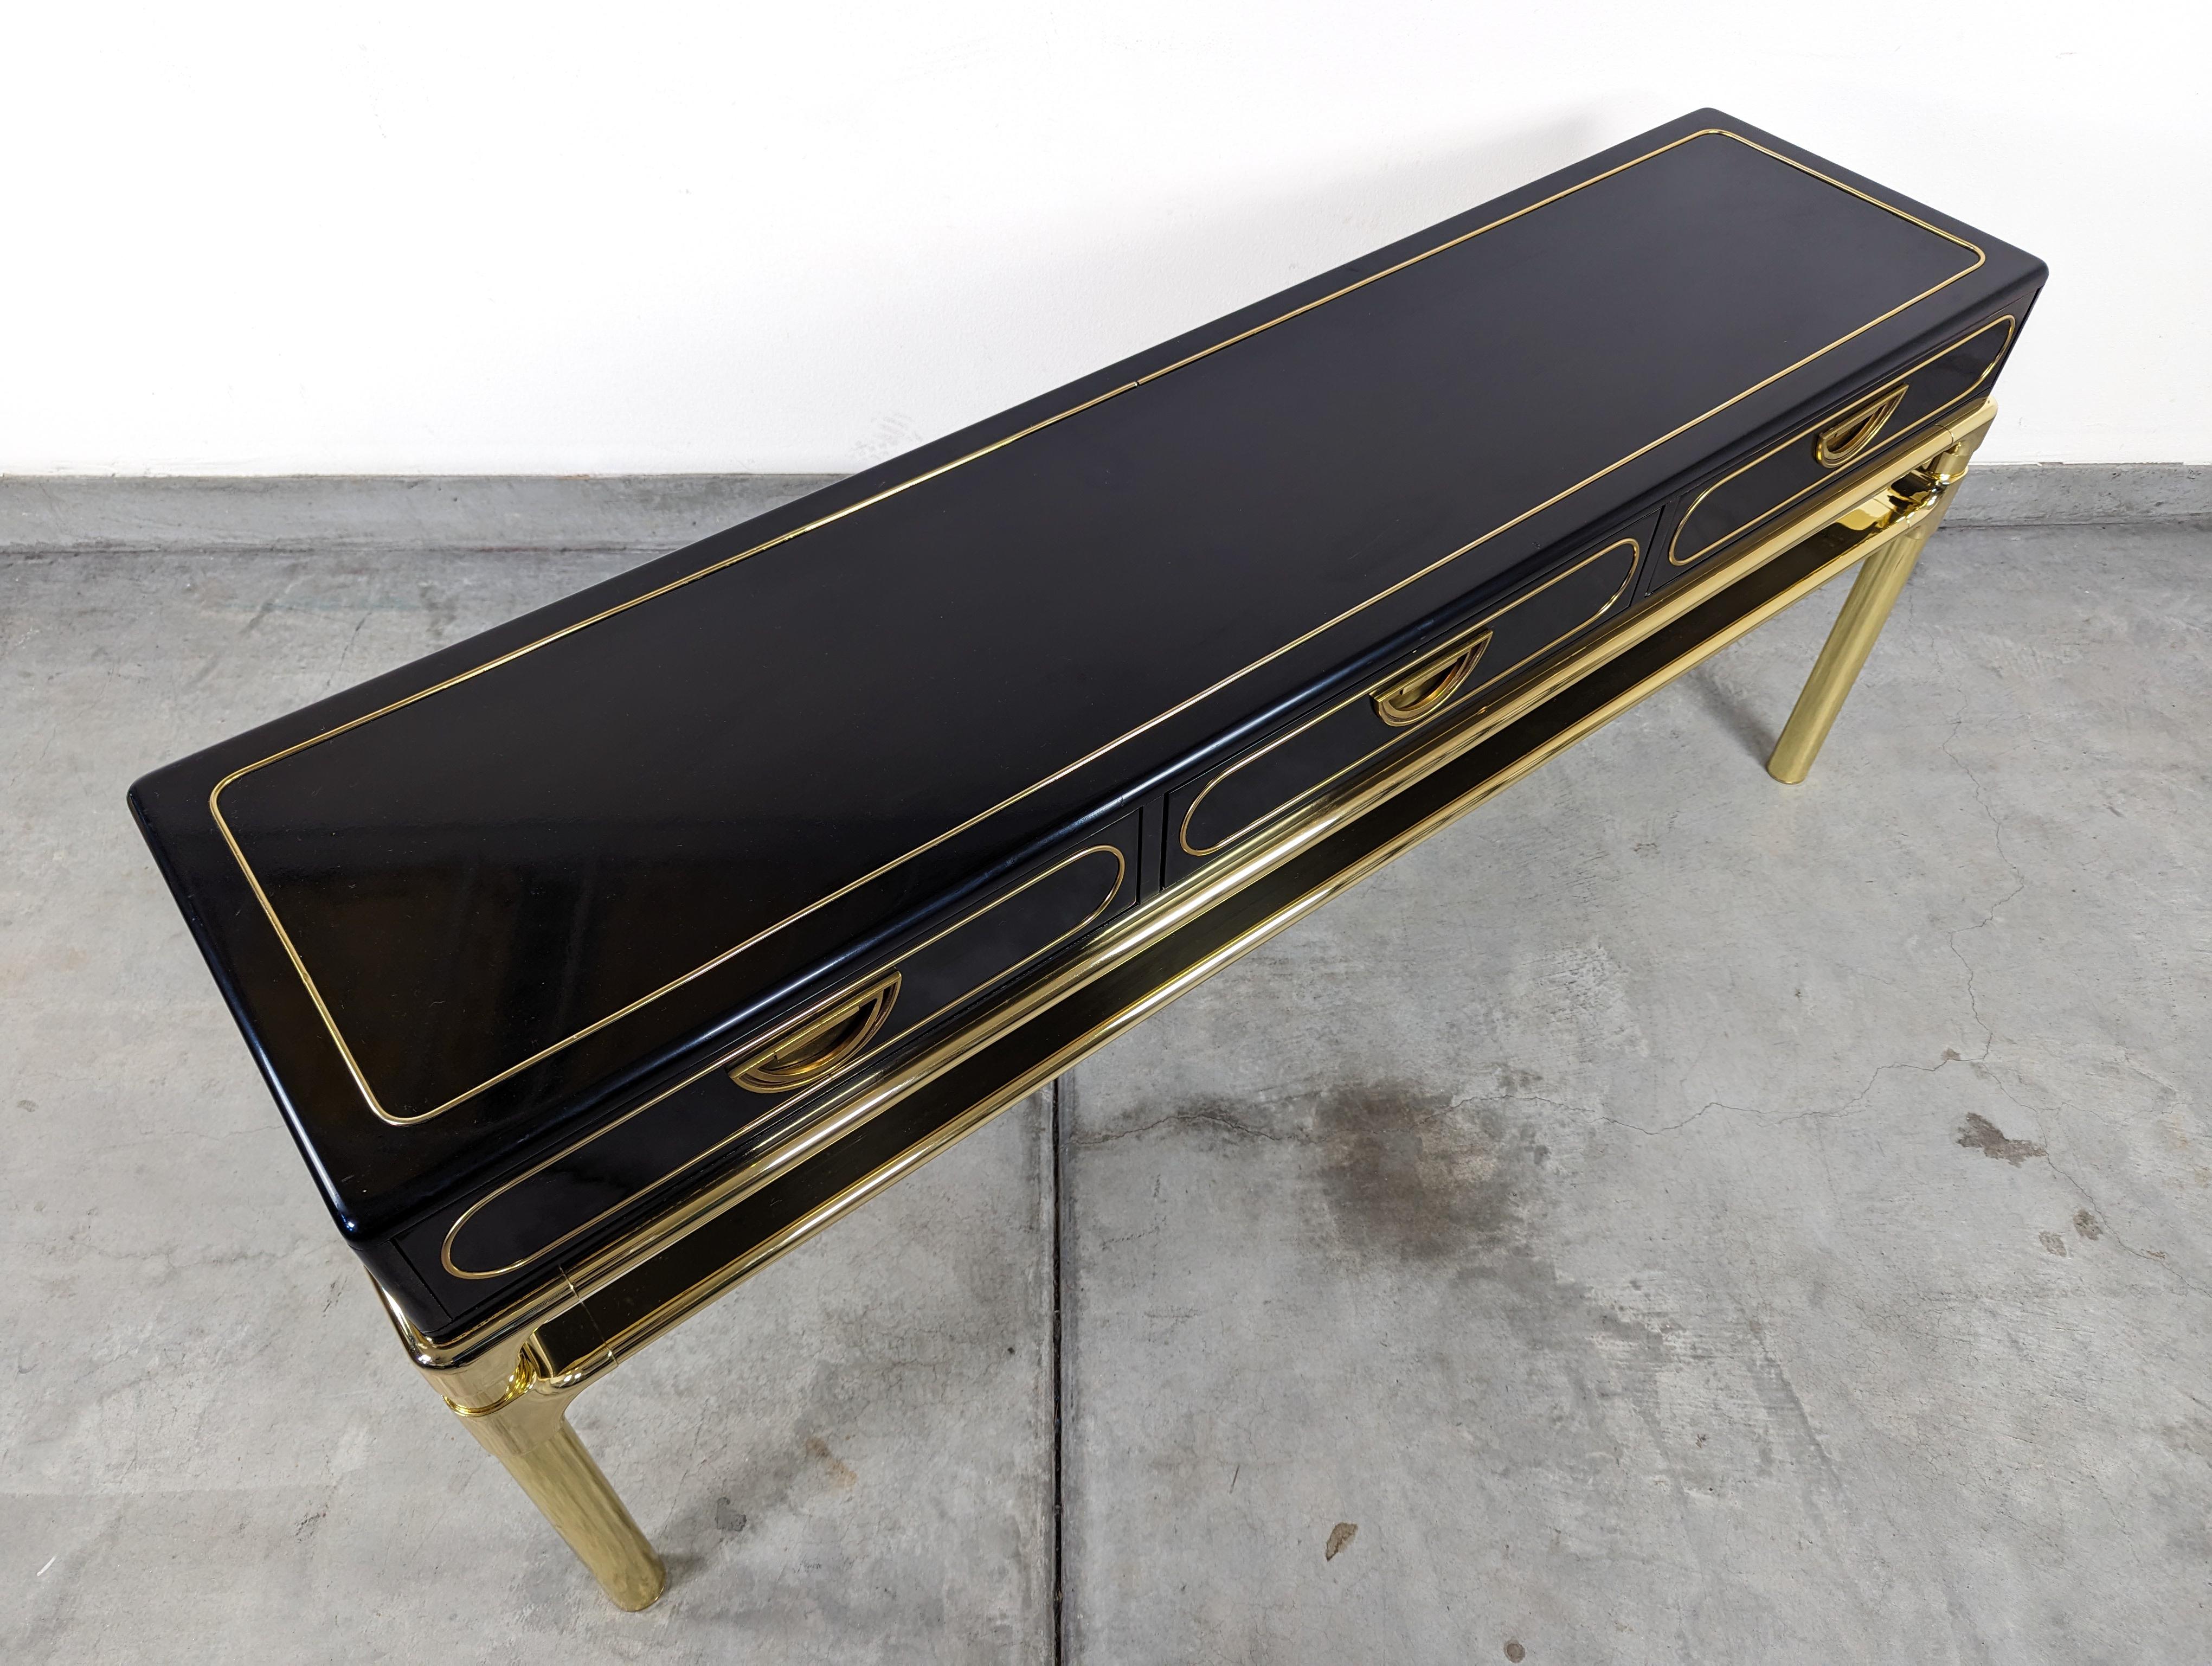 Brass and Black Lacquer Console Table With Drawers by Mastercraft, c1970s For Sale 5